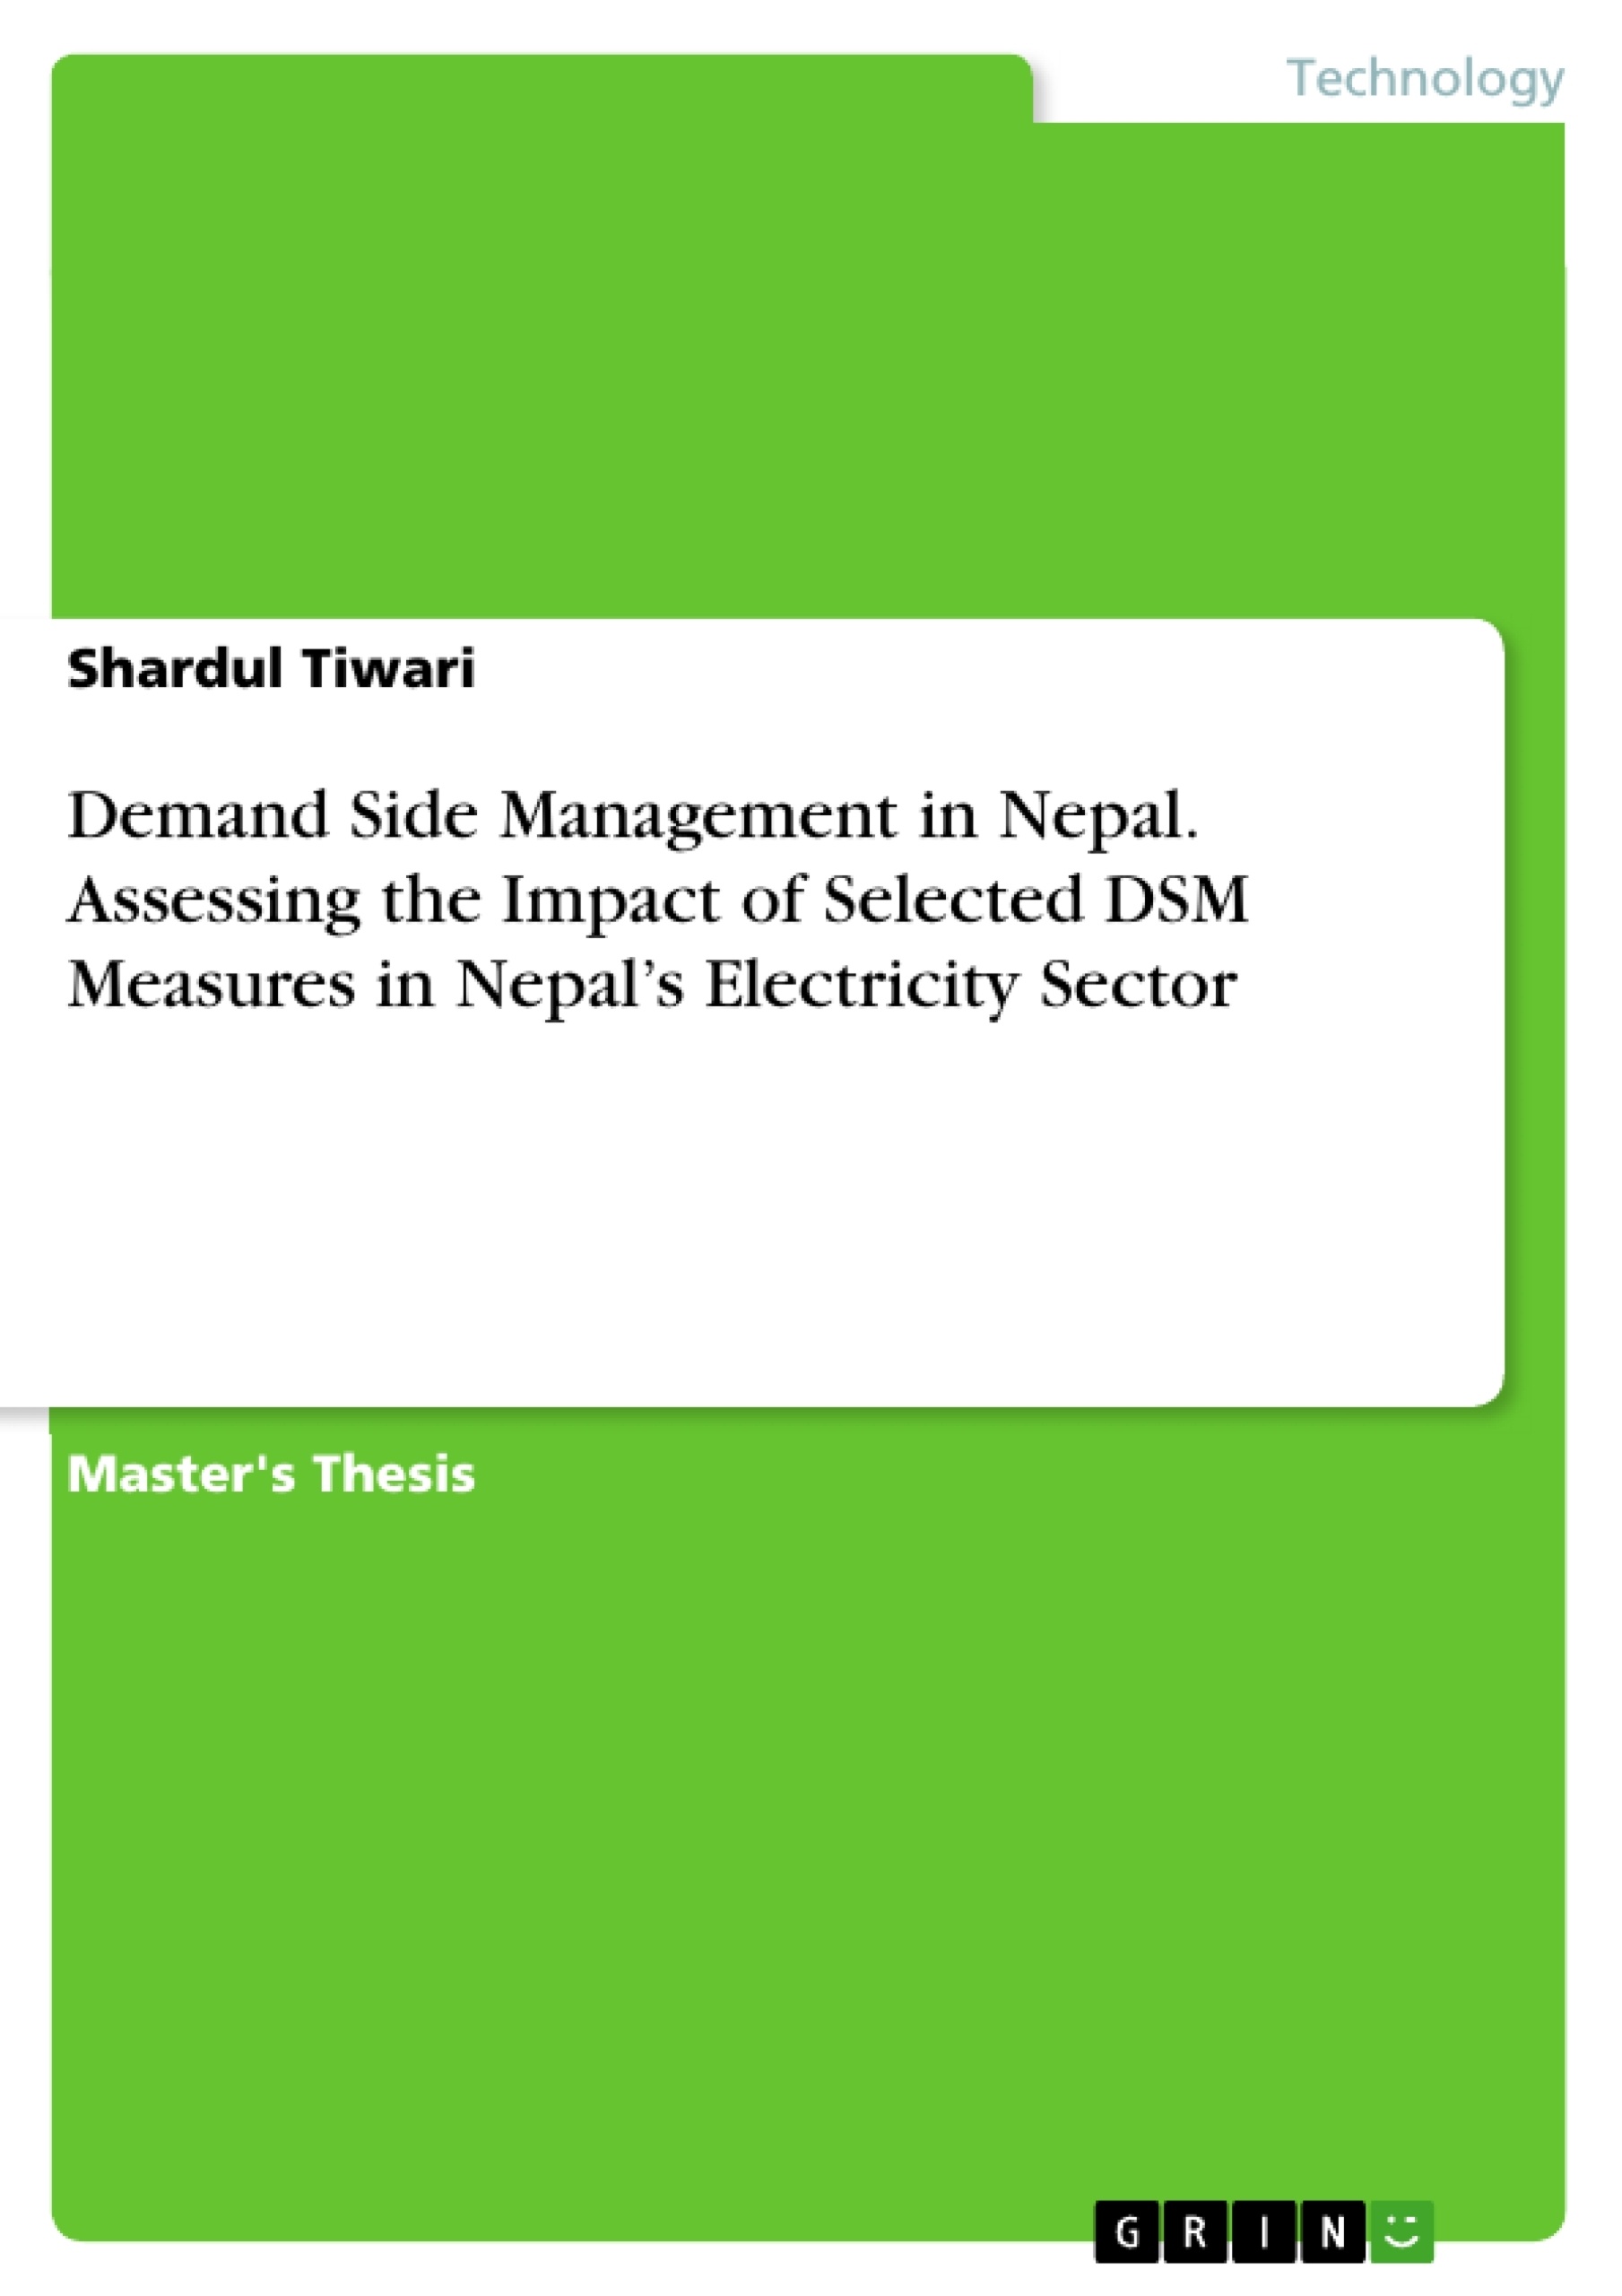 Title: Demand Side Management in Nepal. Assessing the Impact of Selected DSM Measures in Nepal’s Electricity Sector